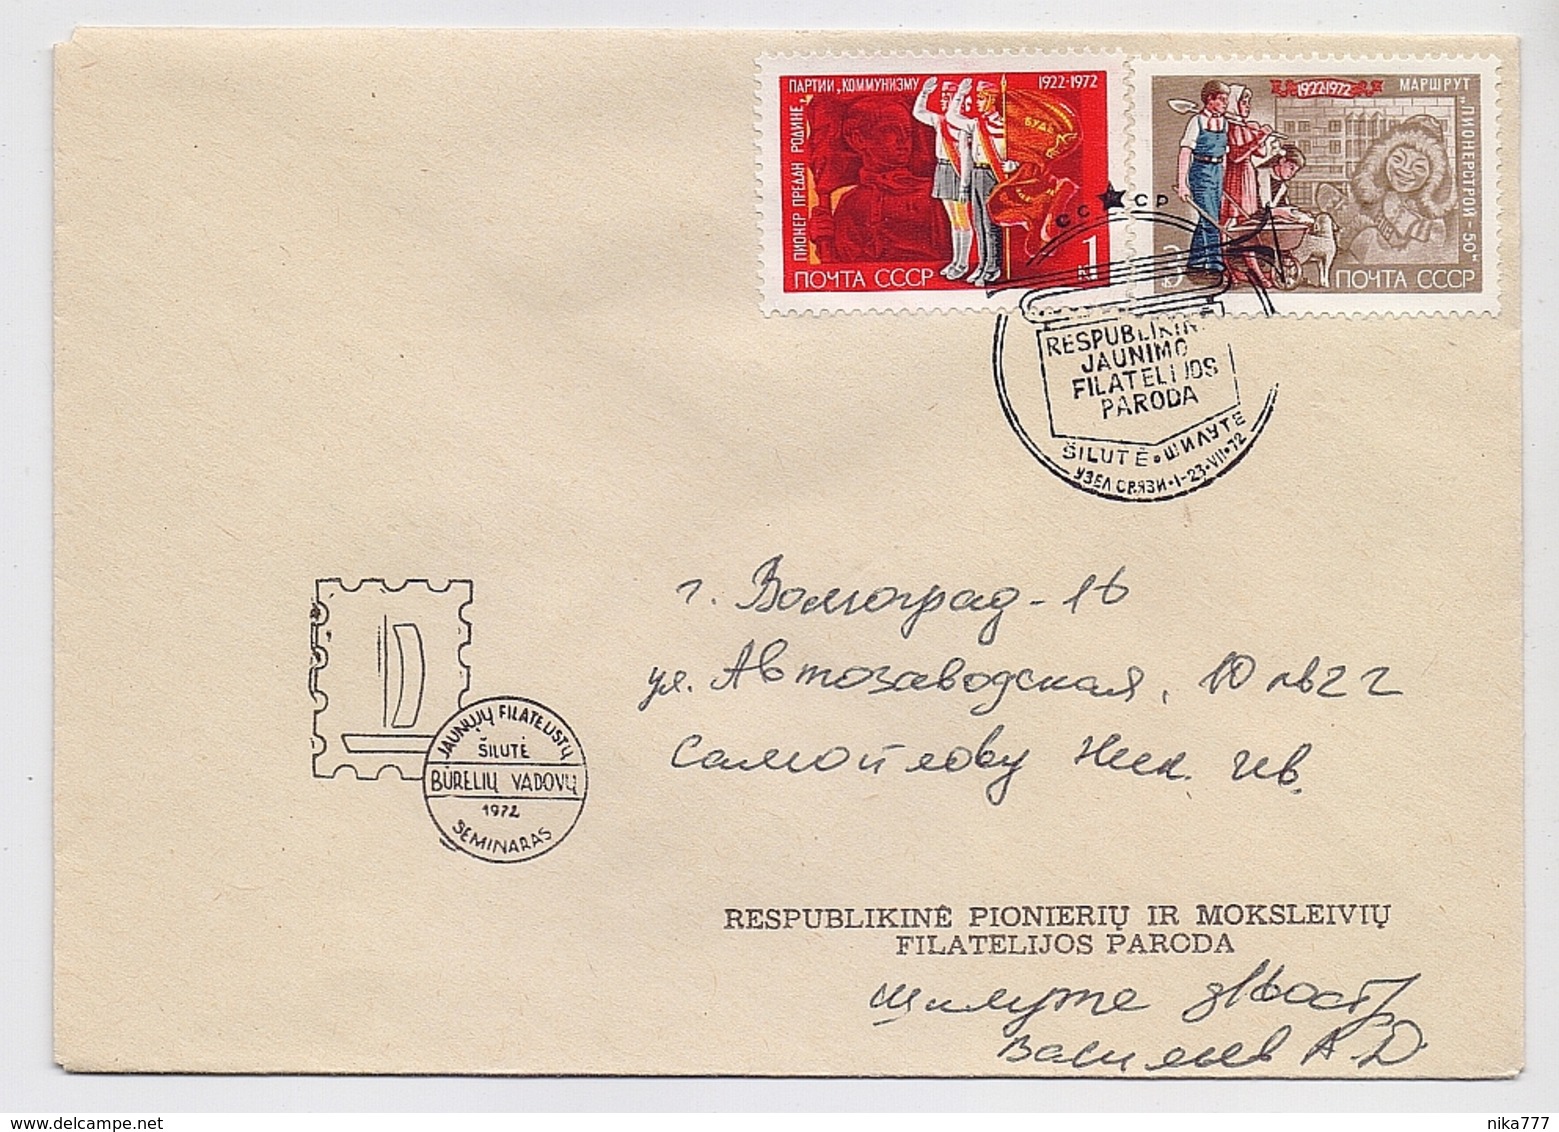 MAIL Post Cover Used USSR RUSSIA Stamp Scout Children Silute Lithuaina - Briefe U. Dokumente